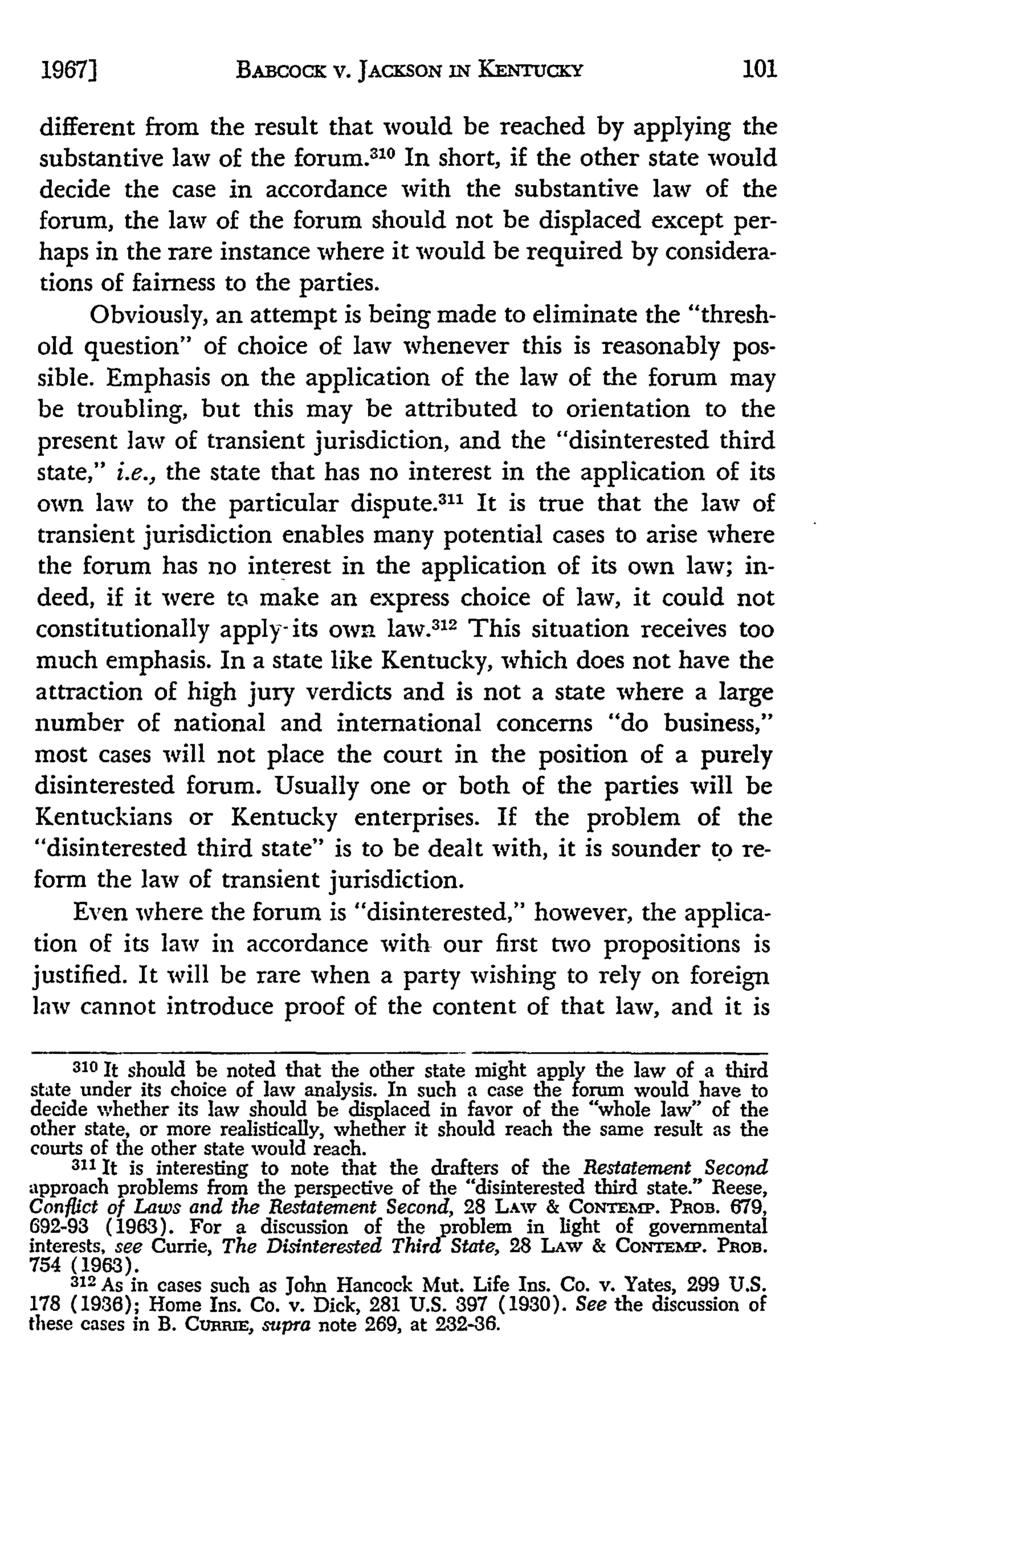 1967] BABcocK V. JACKSON IN KENTUCKY different from the result that would be reached by applying the substantive law of the forum.